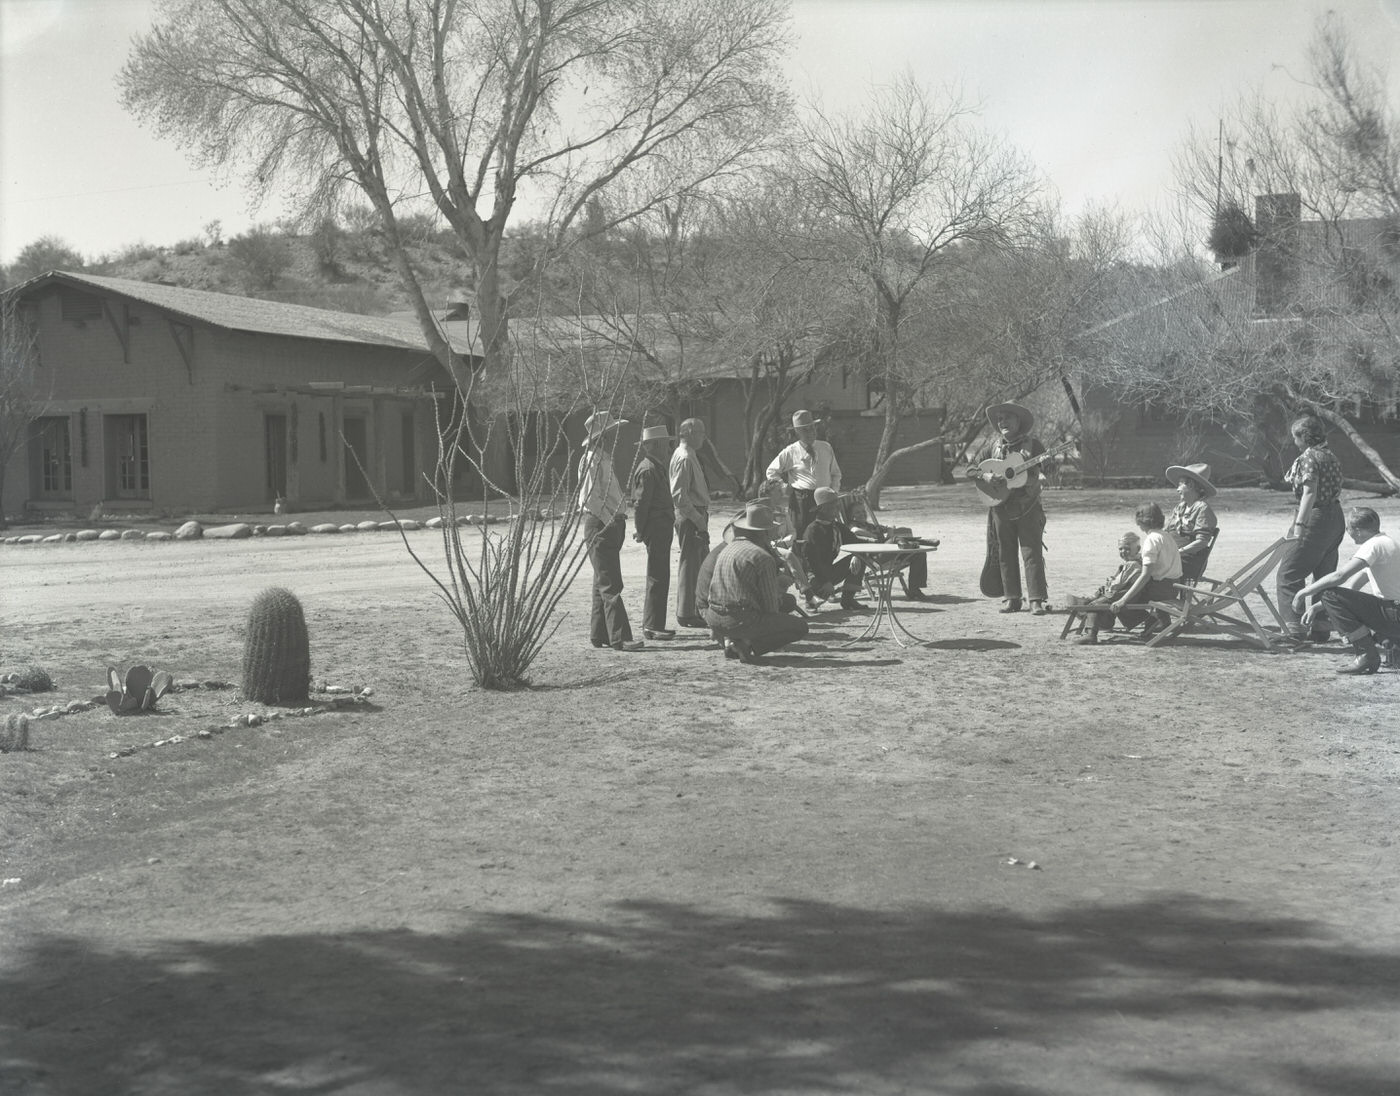 Kay-El-Bar Ranch Guests on the Grounds, 1927